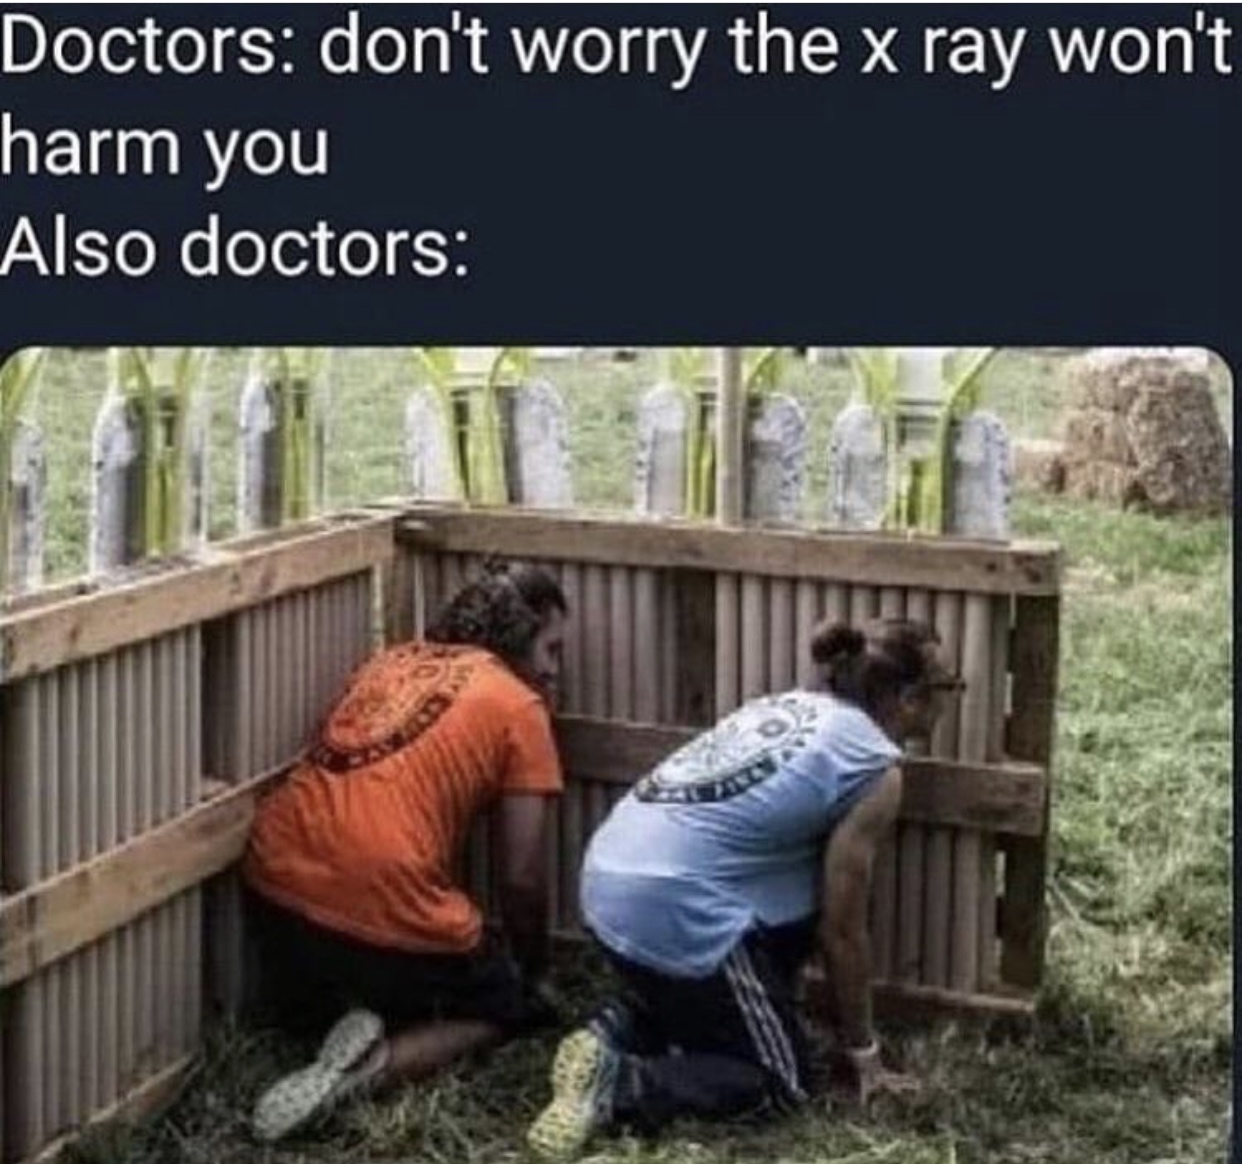 x ray is safe meme - Doctors don't worry the x ray won't harm you Also doctors